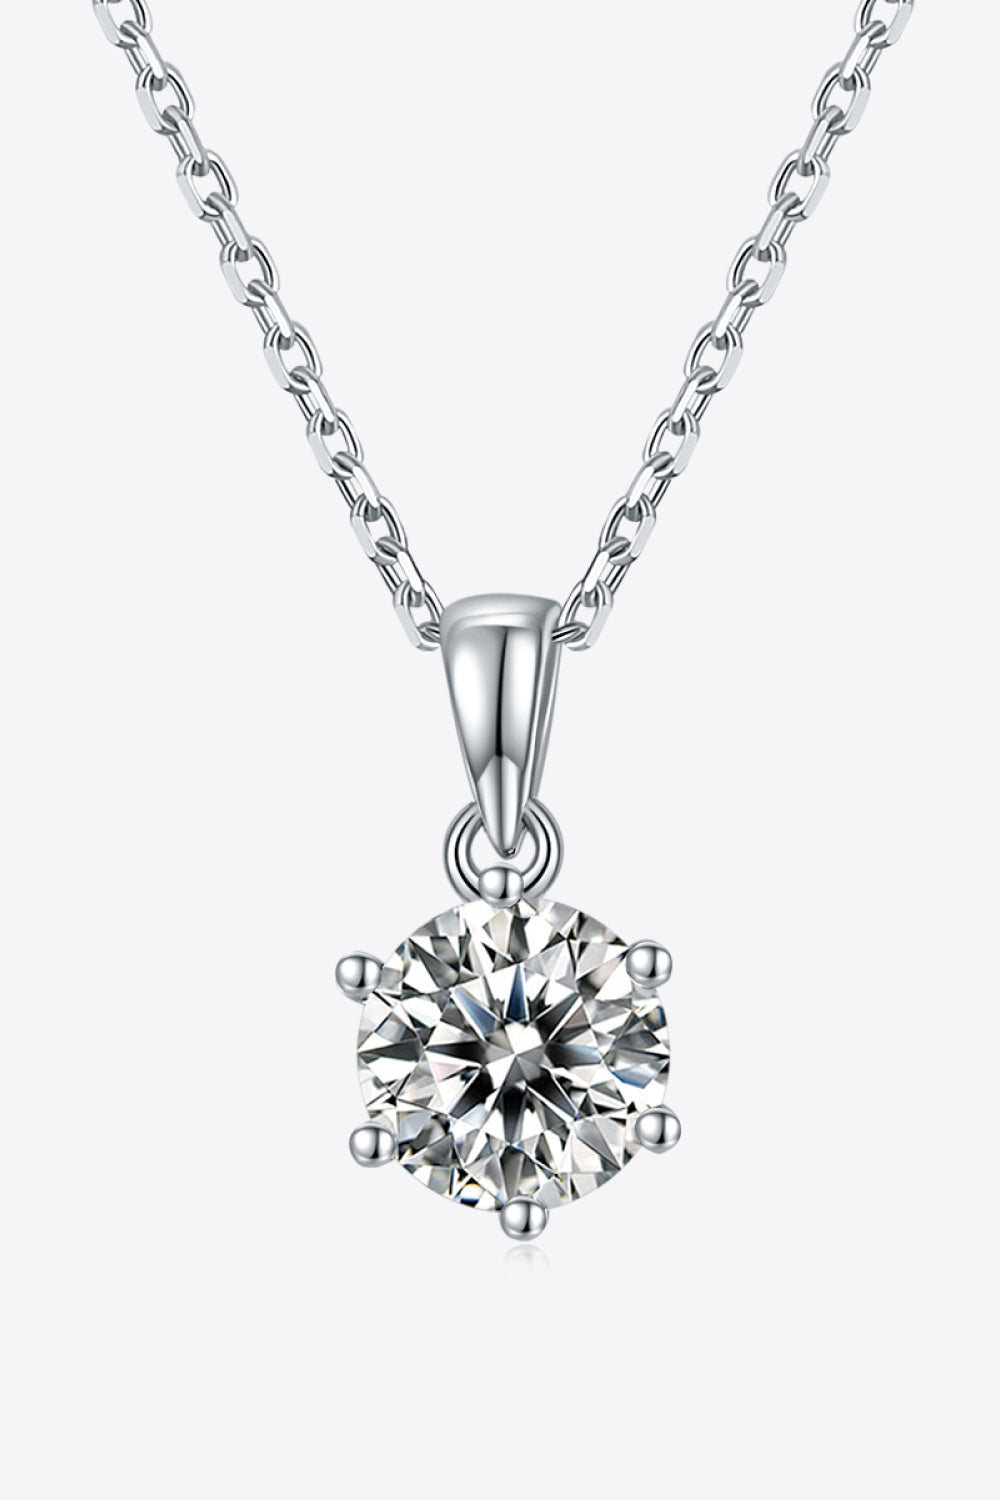 Cheyenne 1 Carat Moissanite 925 Sterling Silver Necklace - Cheeky Chic Boutique